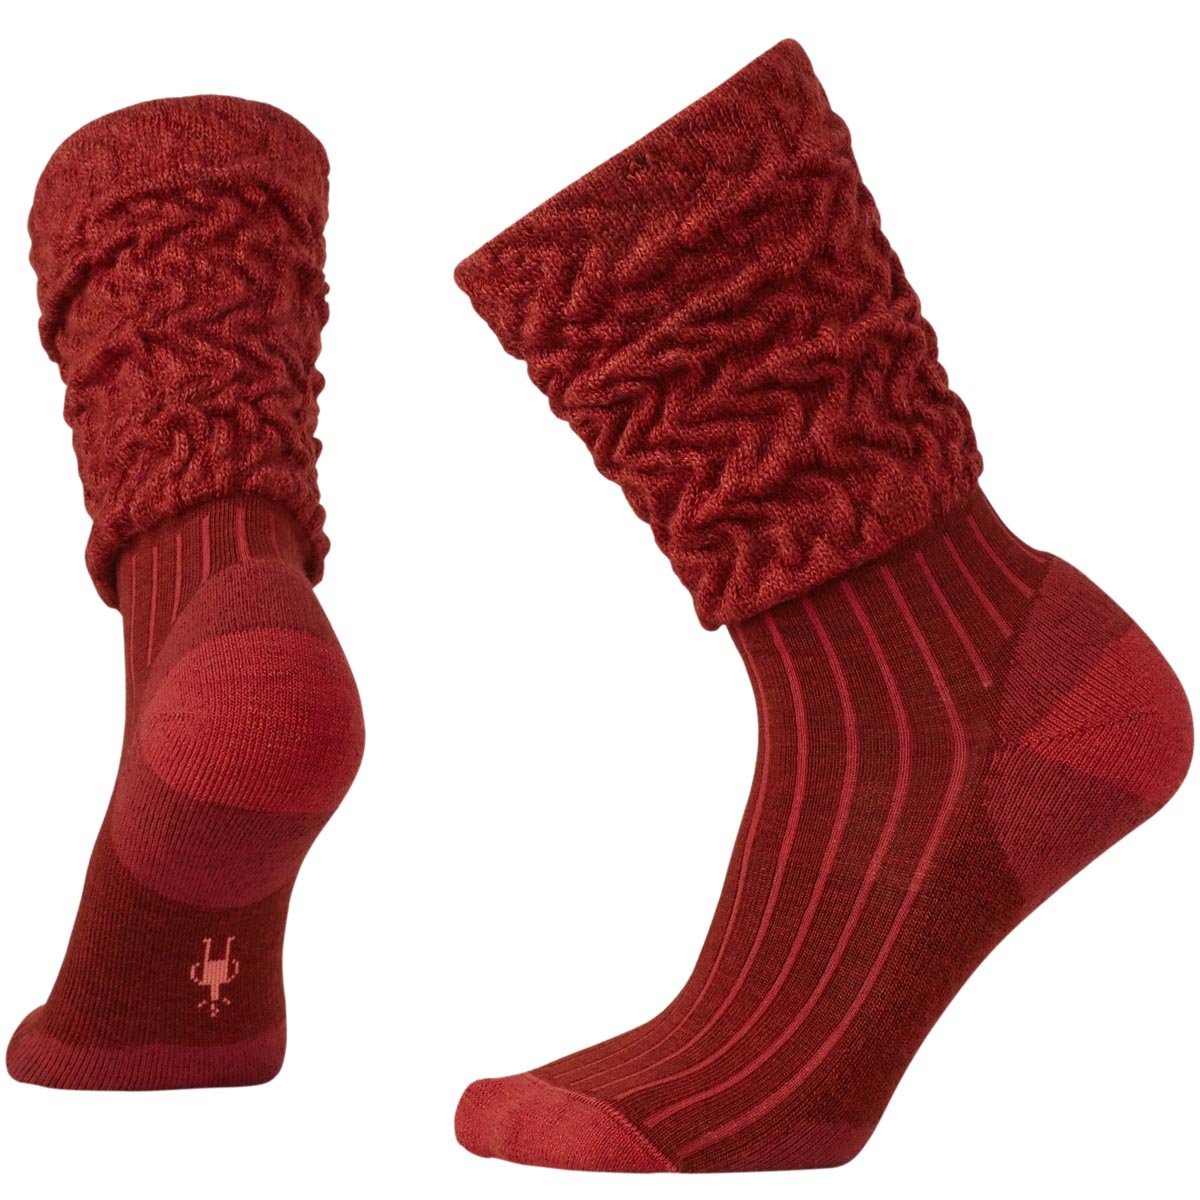 SmartWool Women's Short Boot Slouch Sock Discontinued Pricing